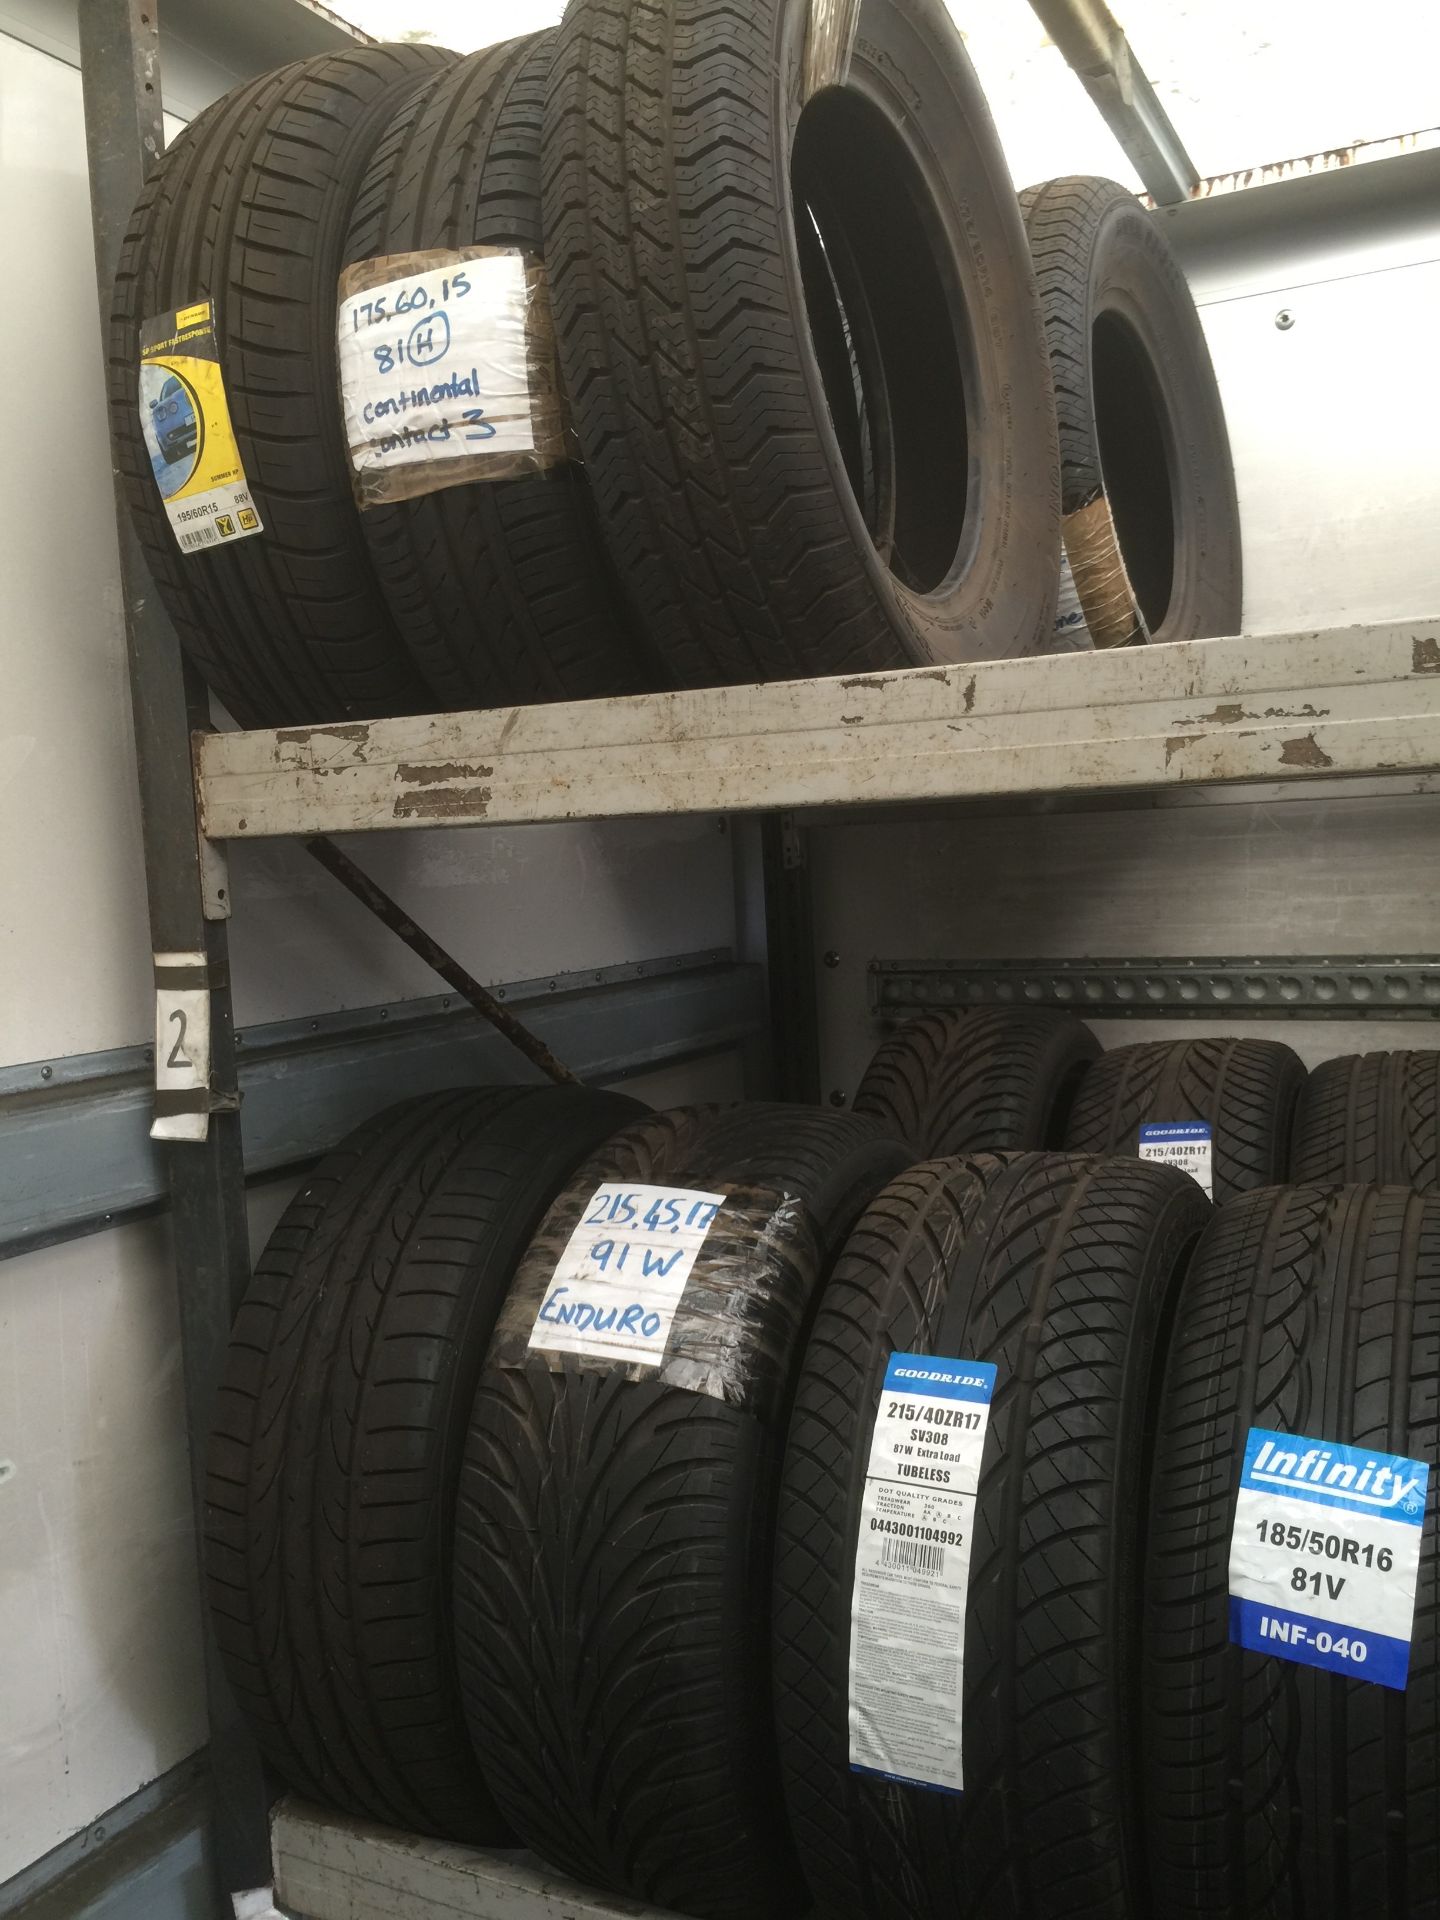 115 + Brand new and unused car tyres - A range of brands and sizes as shown it pictures - Complete - Image 18 of 19